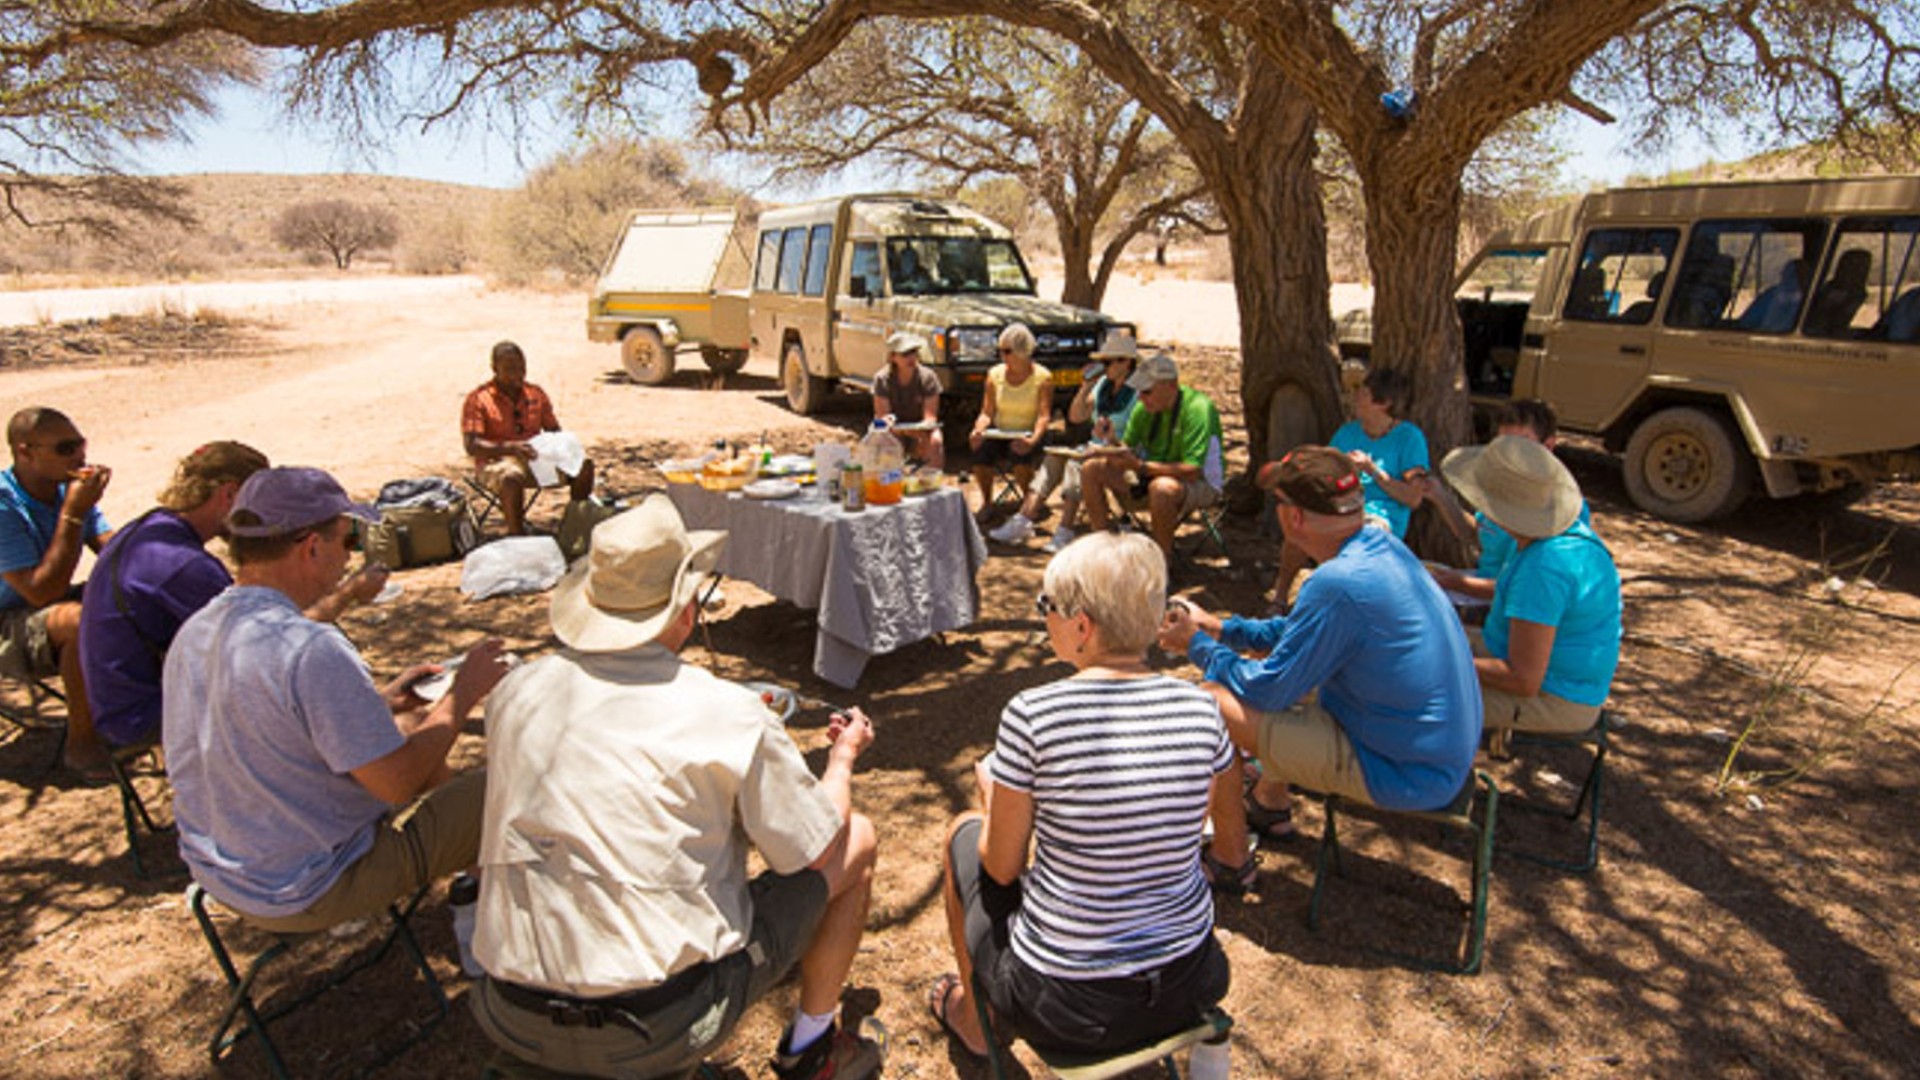 Group of people sitting on camp chair in a circle listening to their safari guide explain something in front of their safari car